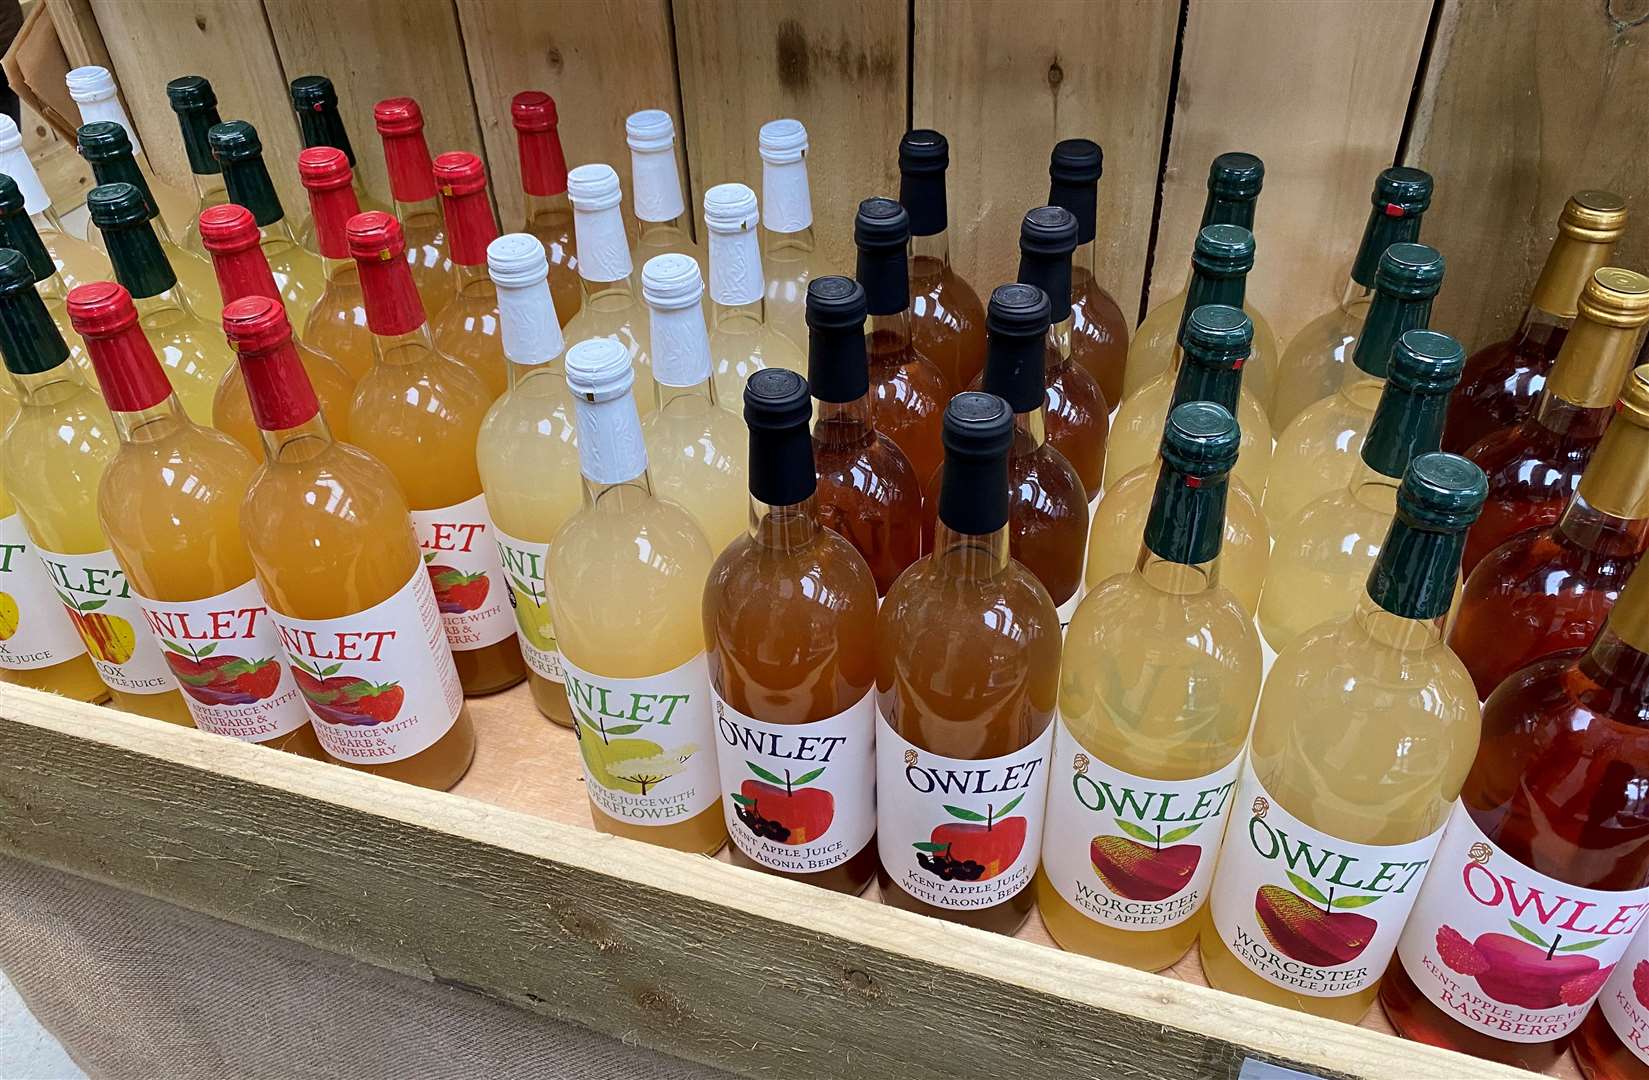 The farm also produces and sells Owlet fruit juice